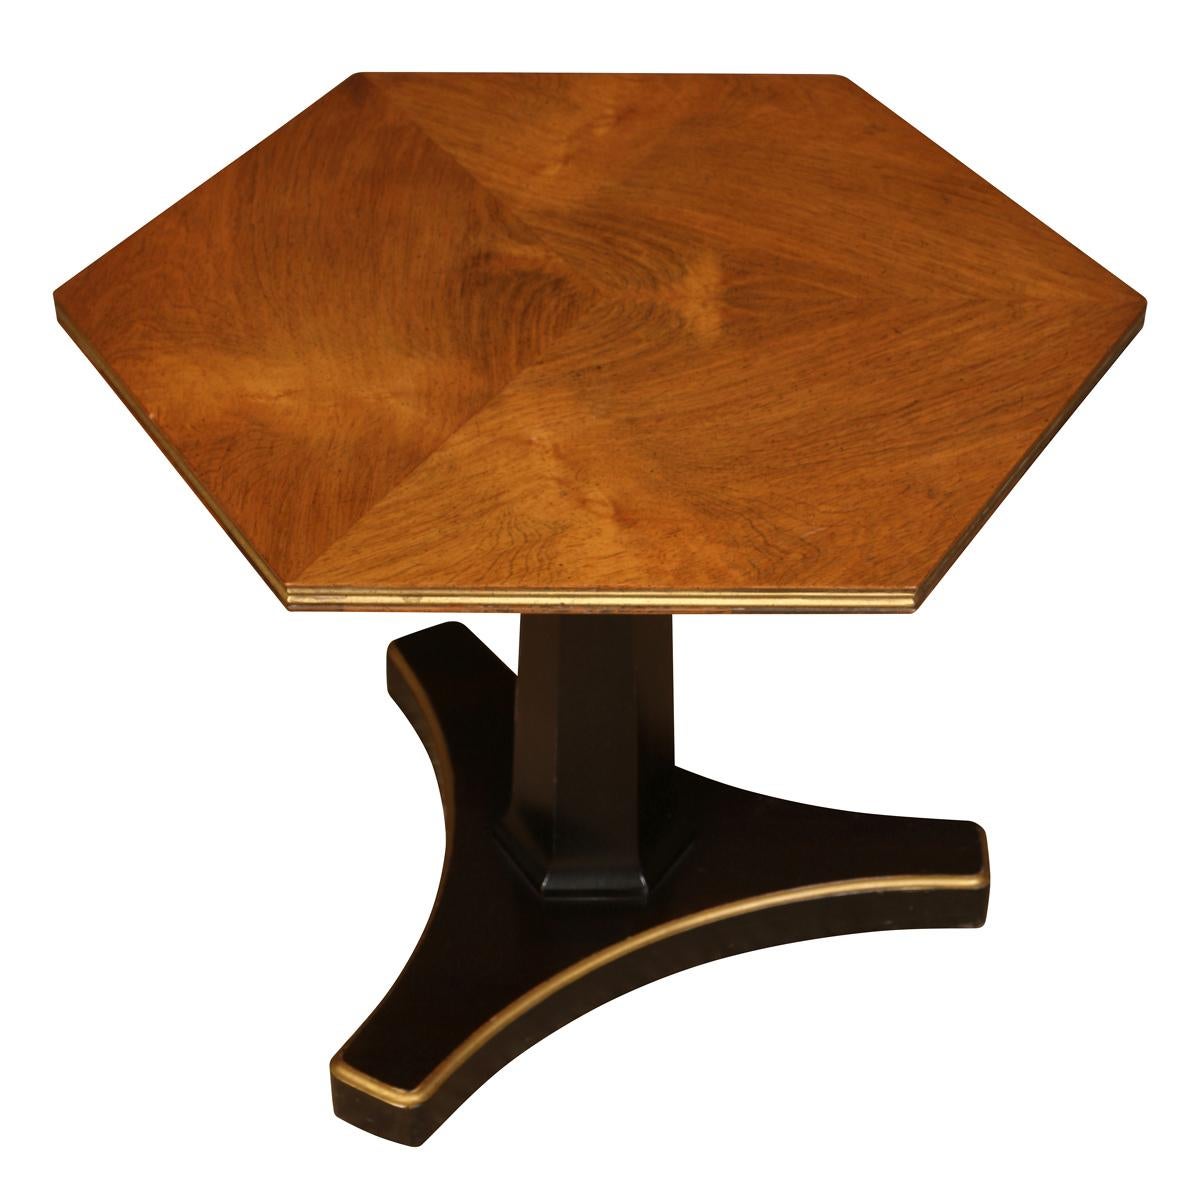 A pair of petite hexagonal Regency style side tables with ebonized pedestal bases and walnut tops in hexagonal motif.